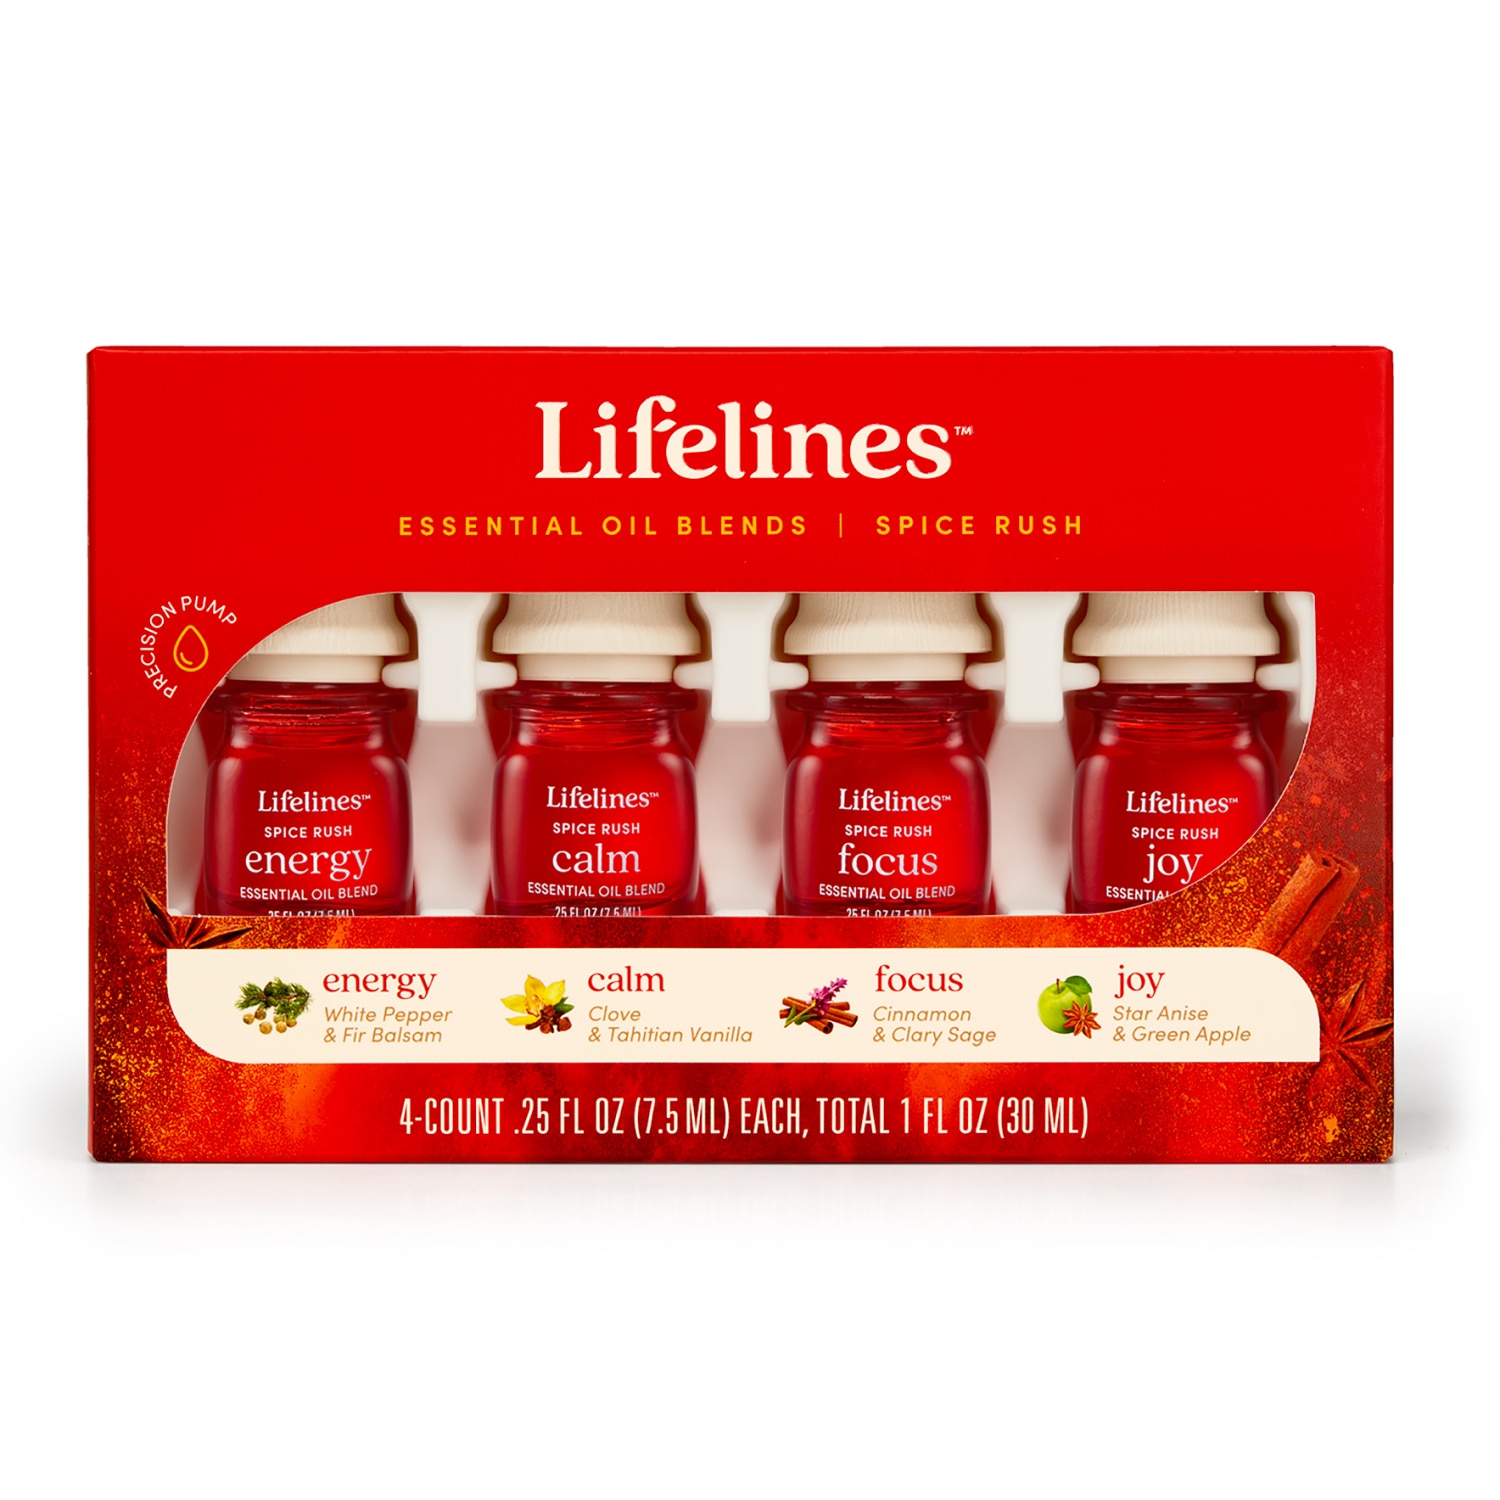 Lifelines Essential Oil Blends 4 Pack - Spice Rush